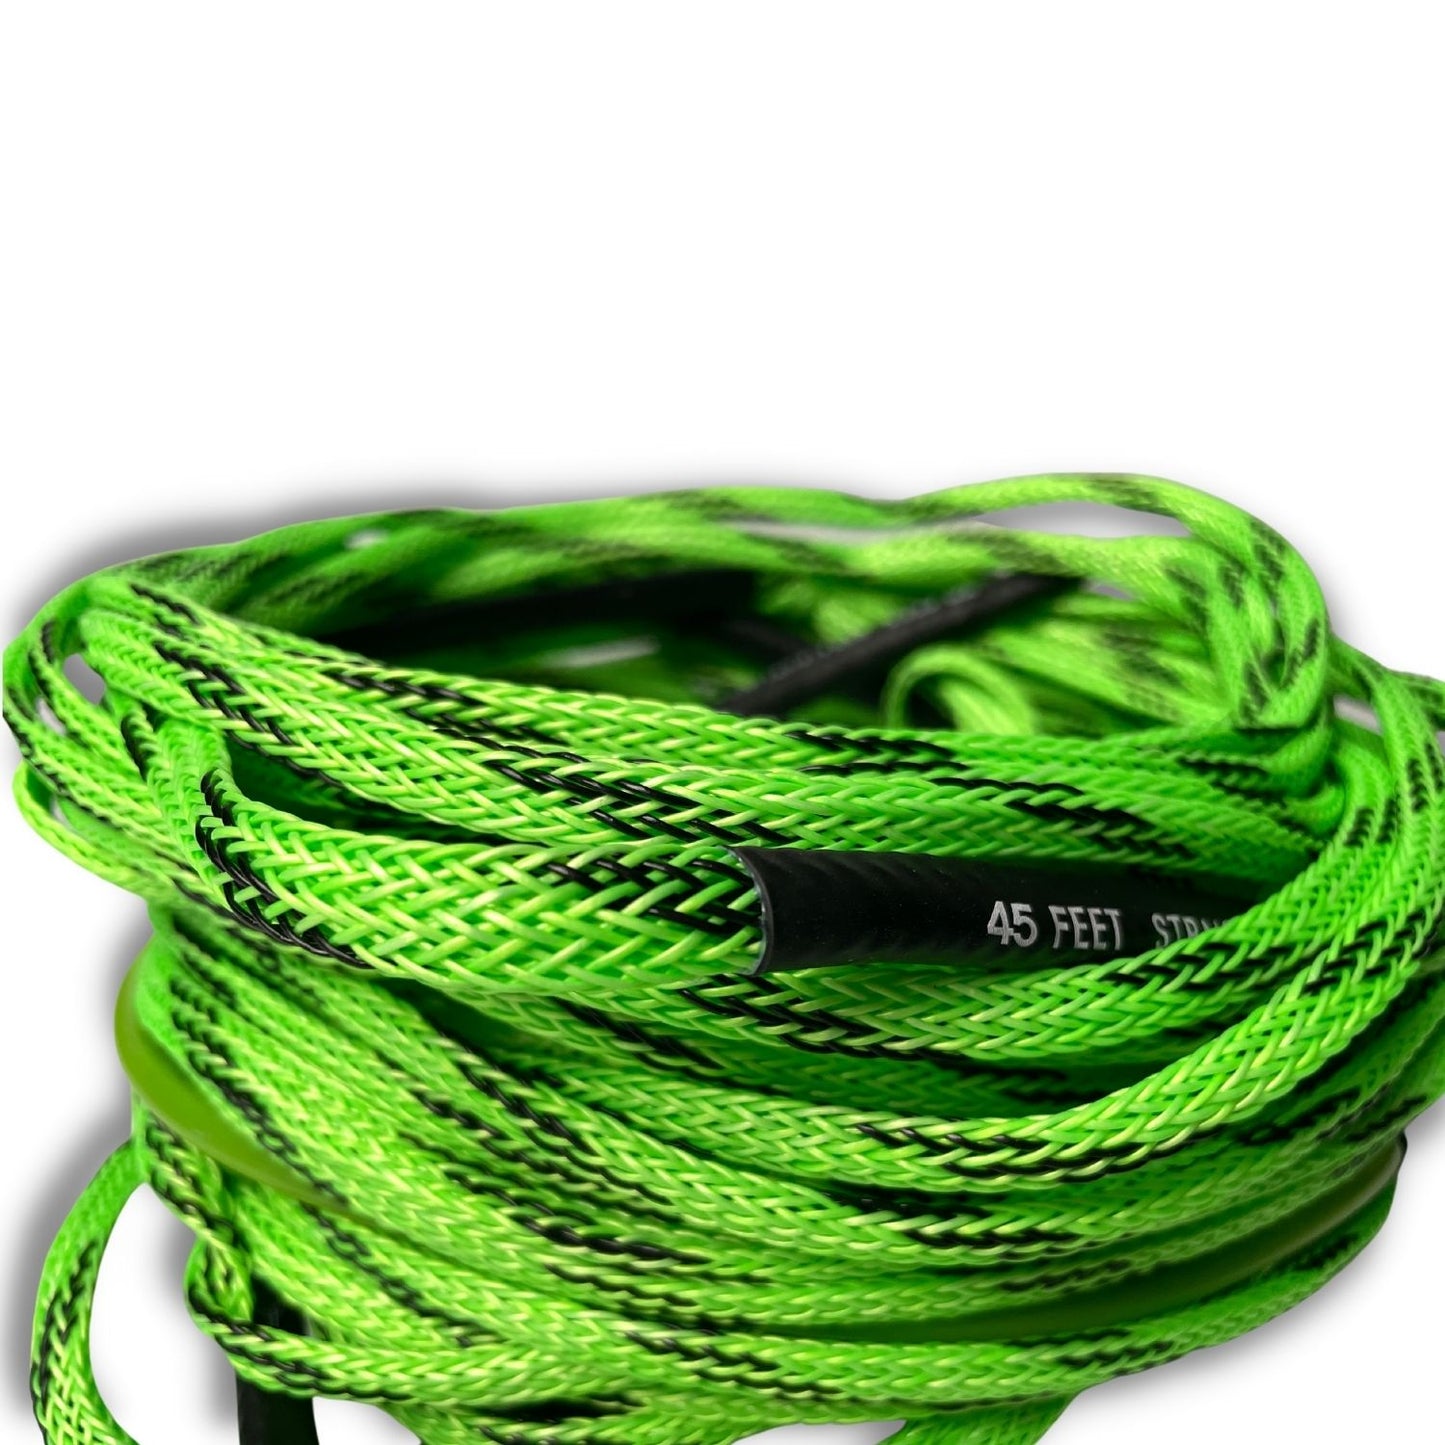 MELO WAKEBOARD ROPE